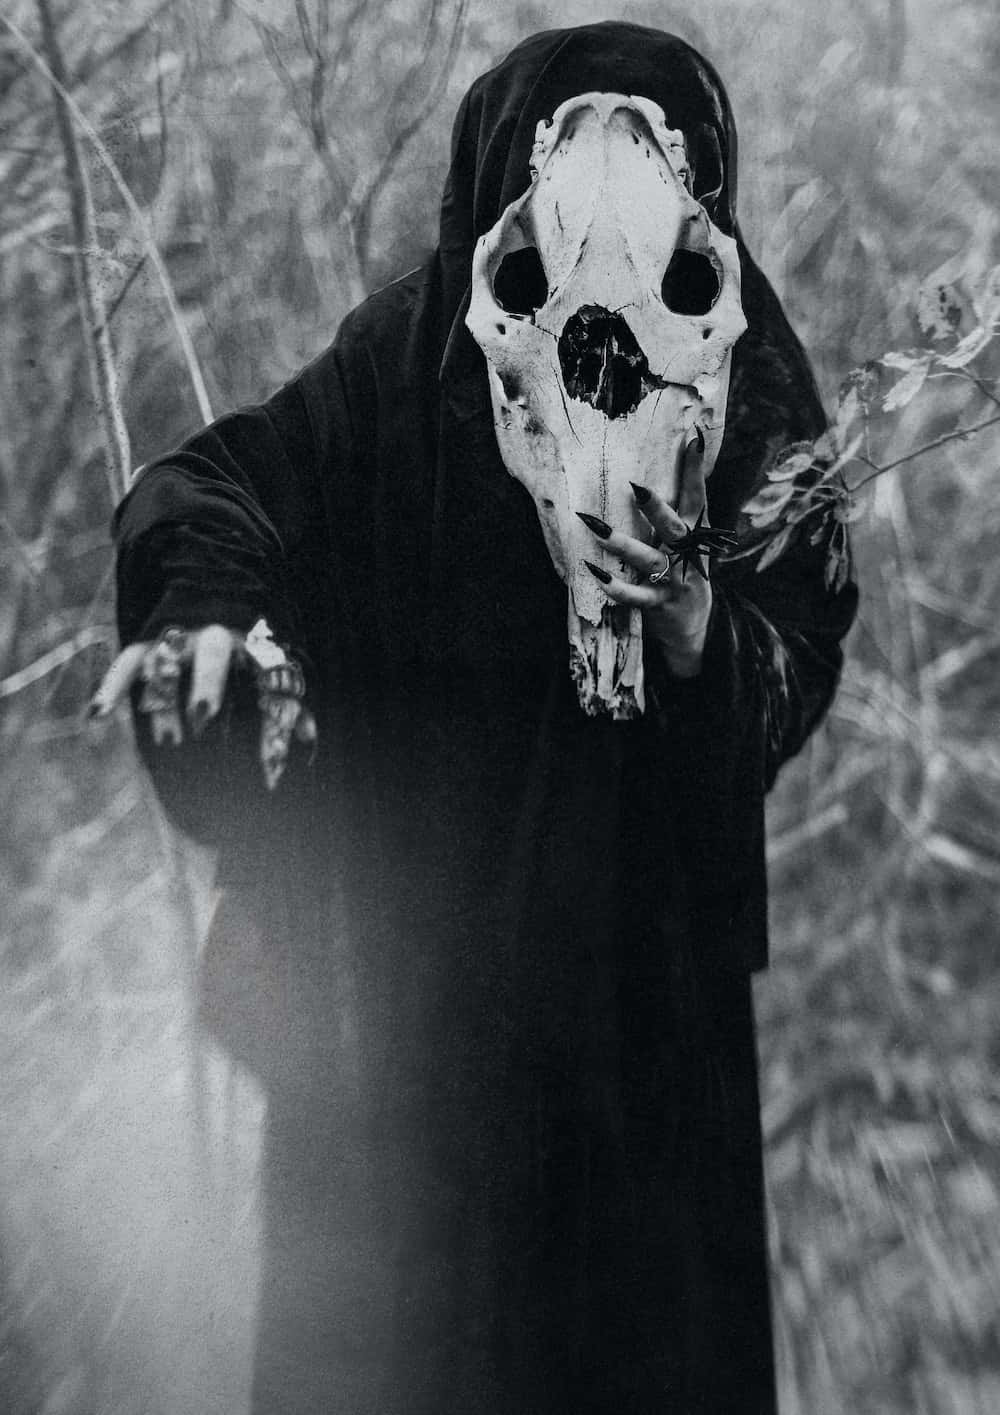 a black and white photo of a person in a mask